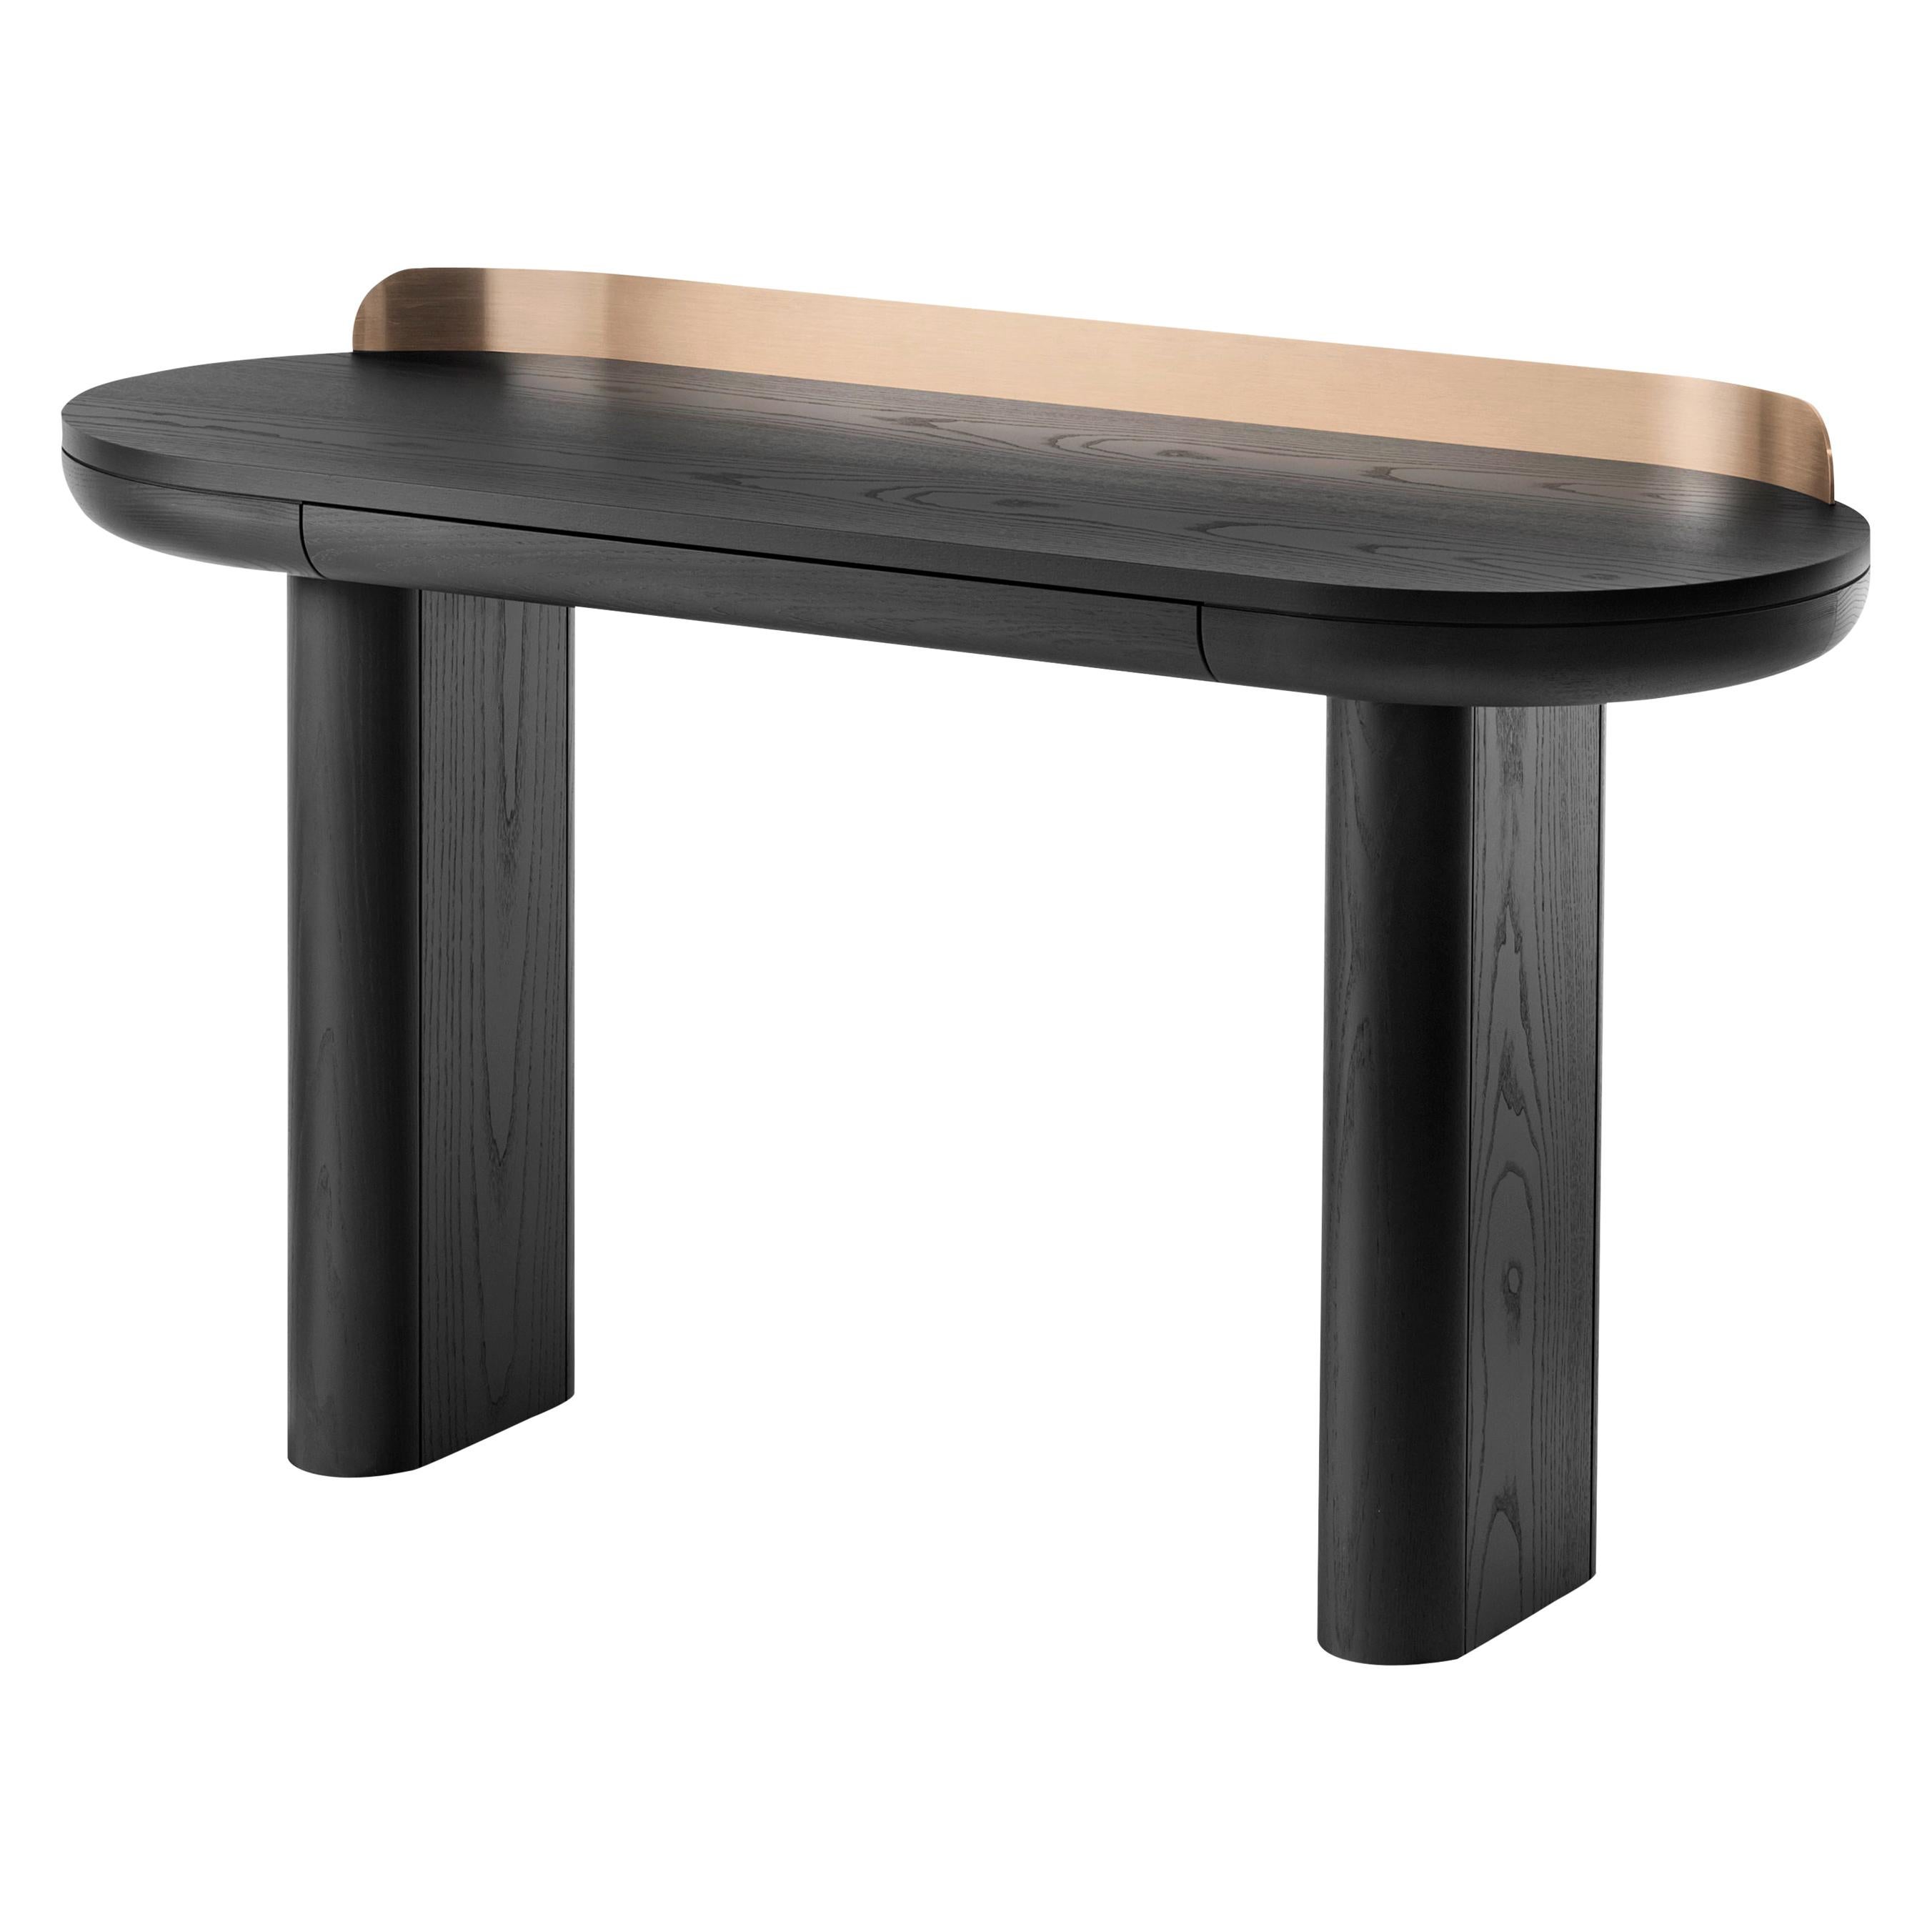 For Sale: Orange (Copper Metal) Jumbo Table with Structure in Black Ash, by Paolo Cappello